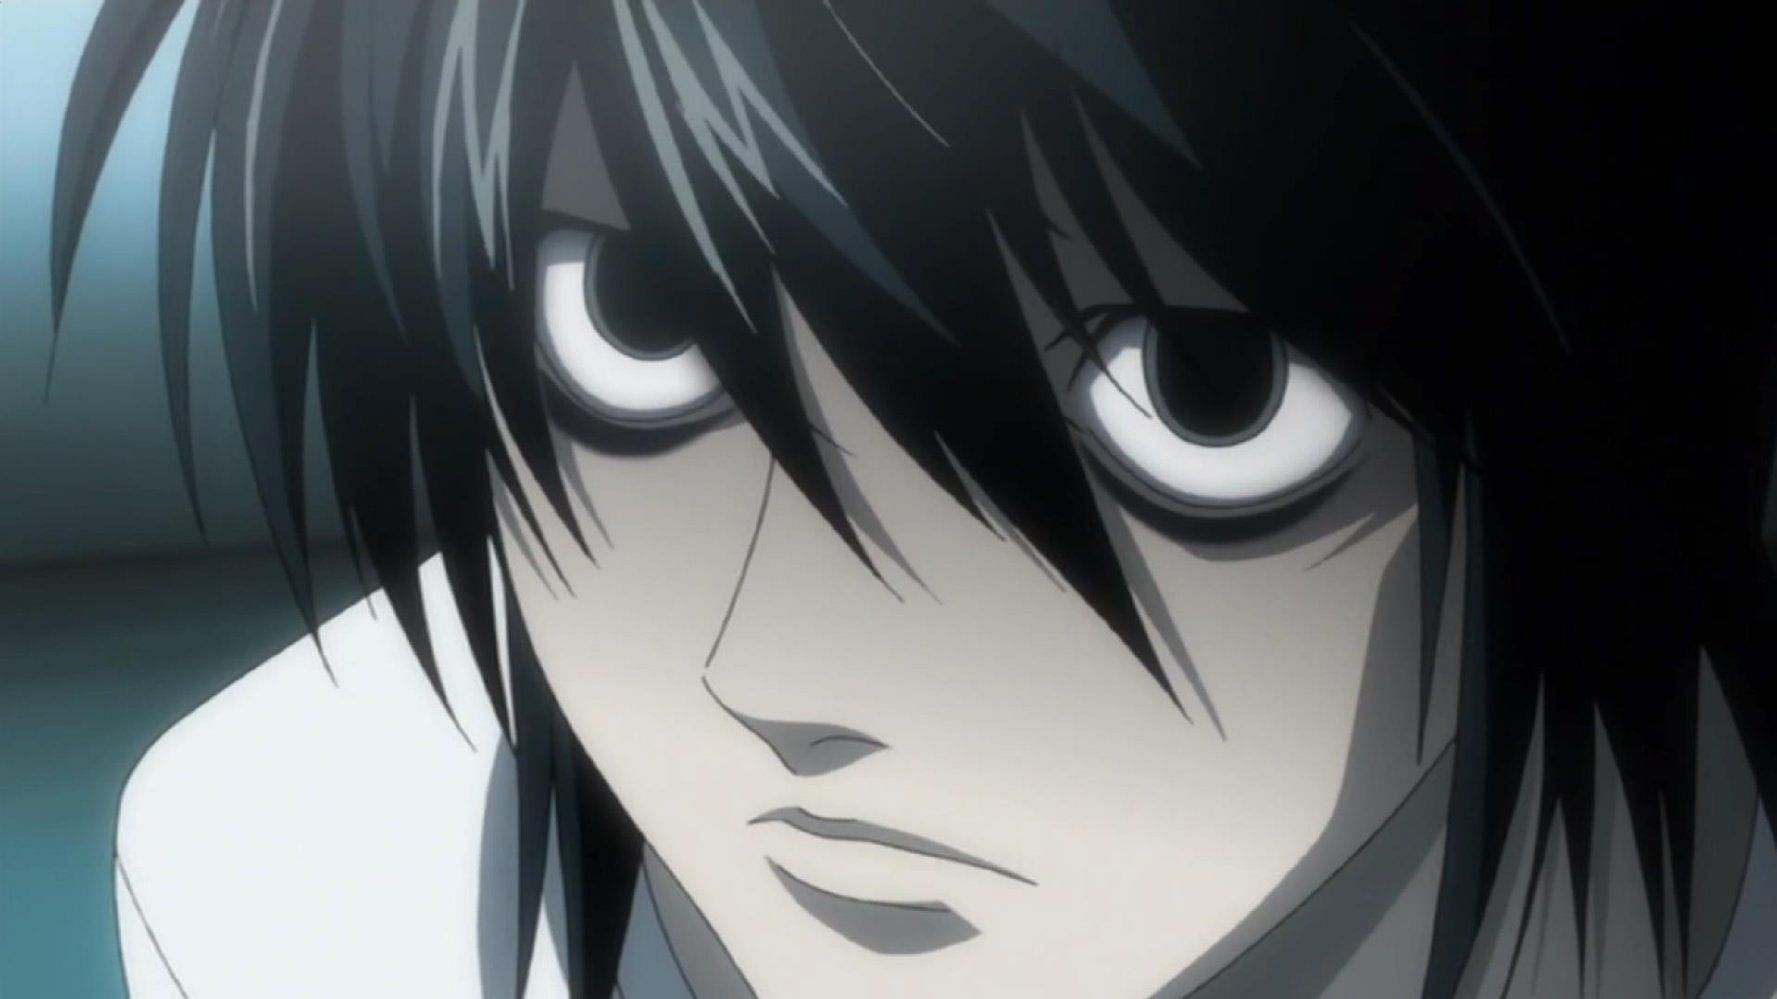 L Lawliet as he appears in the &#039;Death Note&#039; anime (Image via Madhouse)